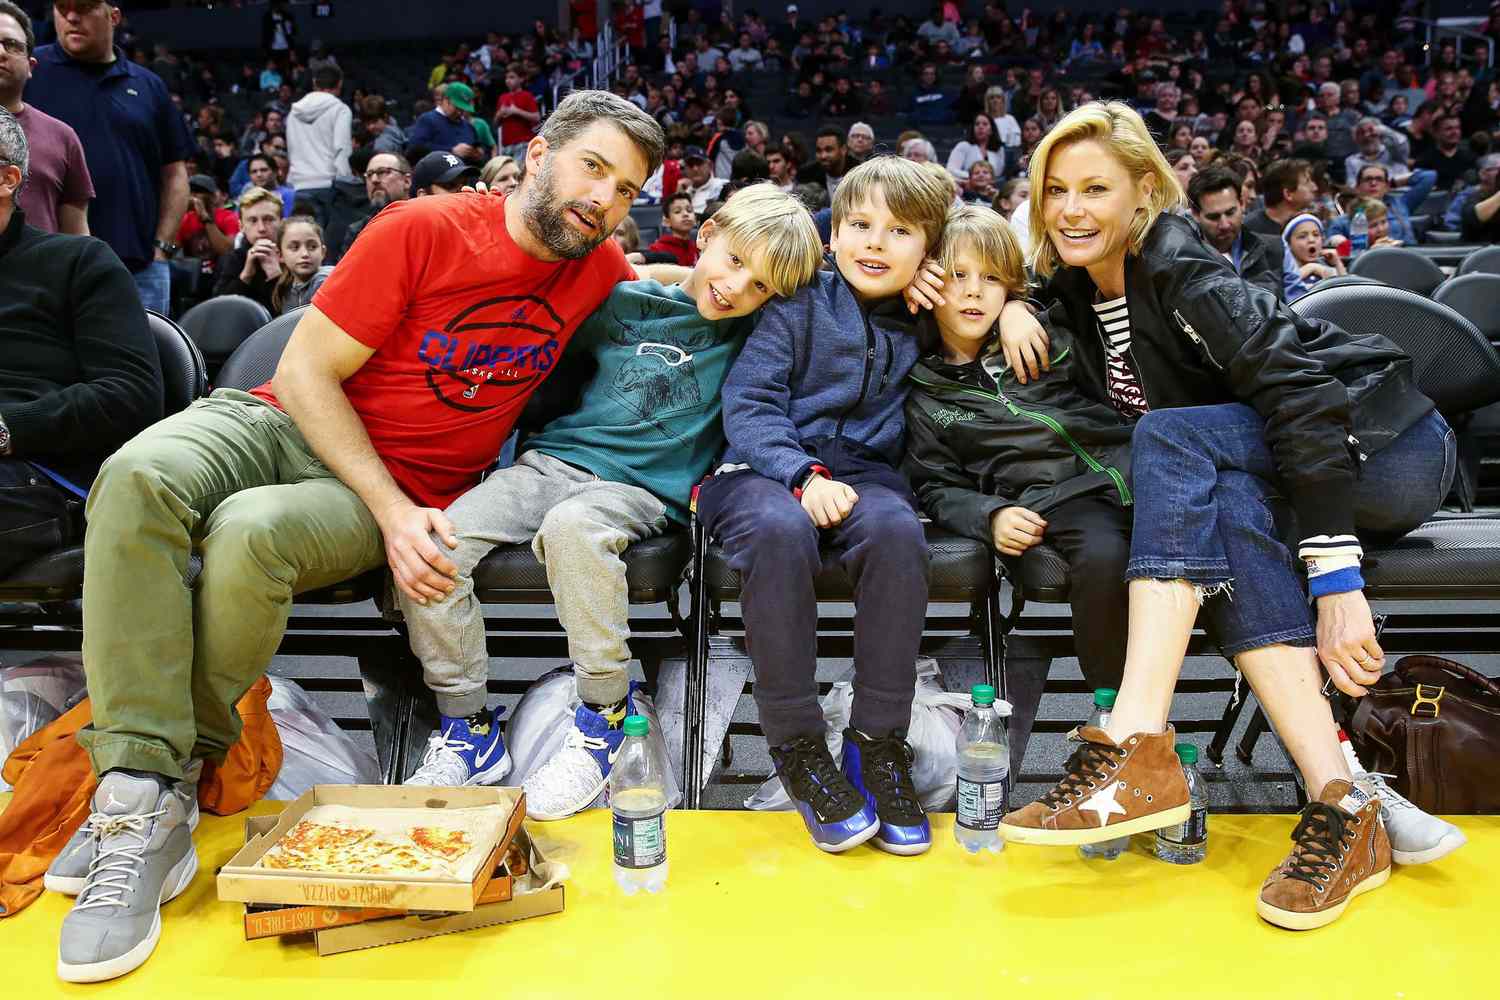 Celebrities at the Harlem Globetrotters game, Los Angeles, USA - 19 Feb 2017